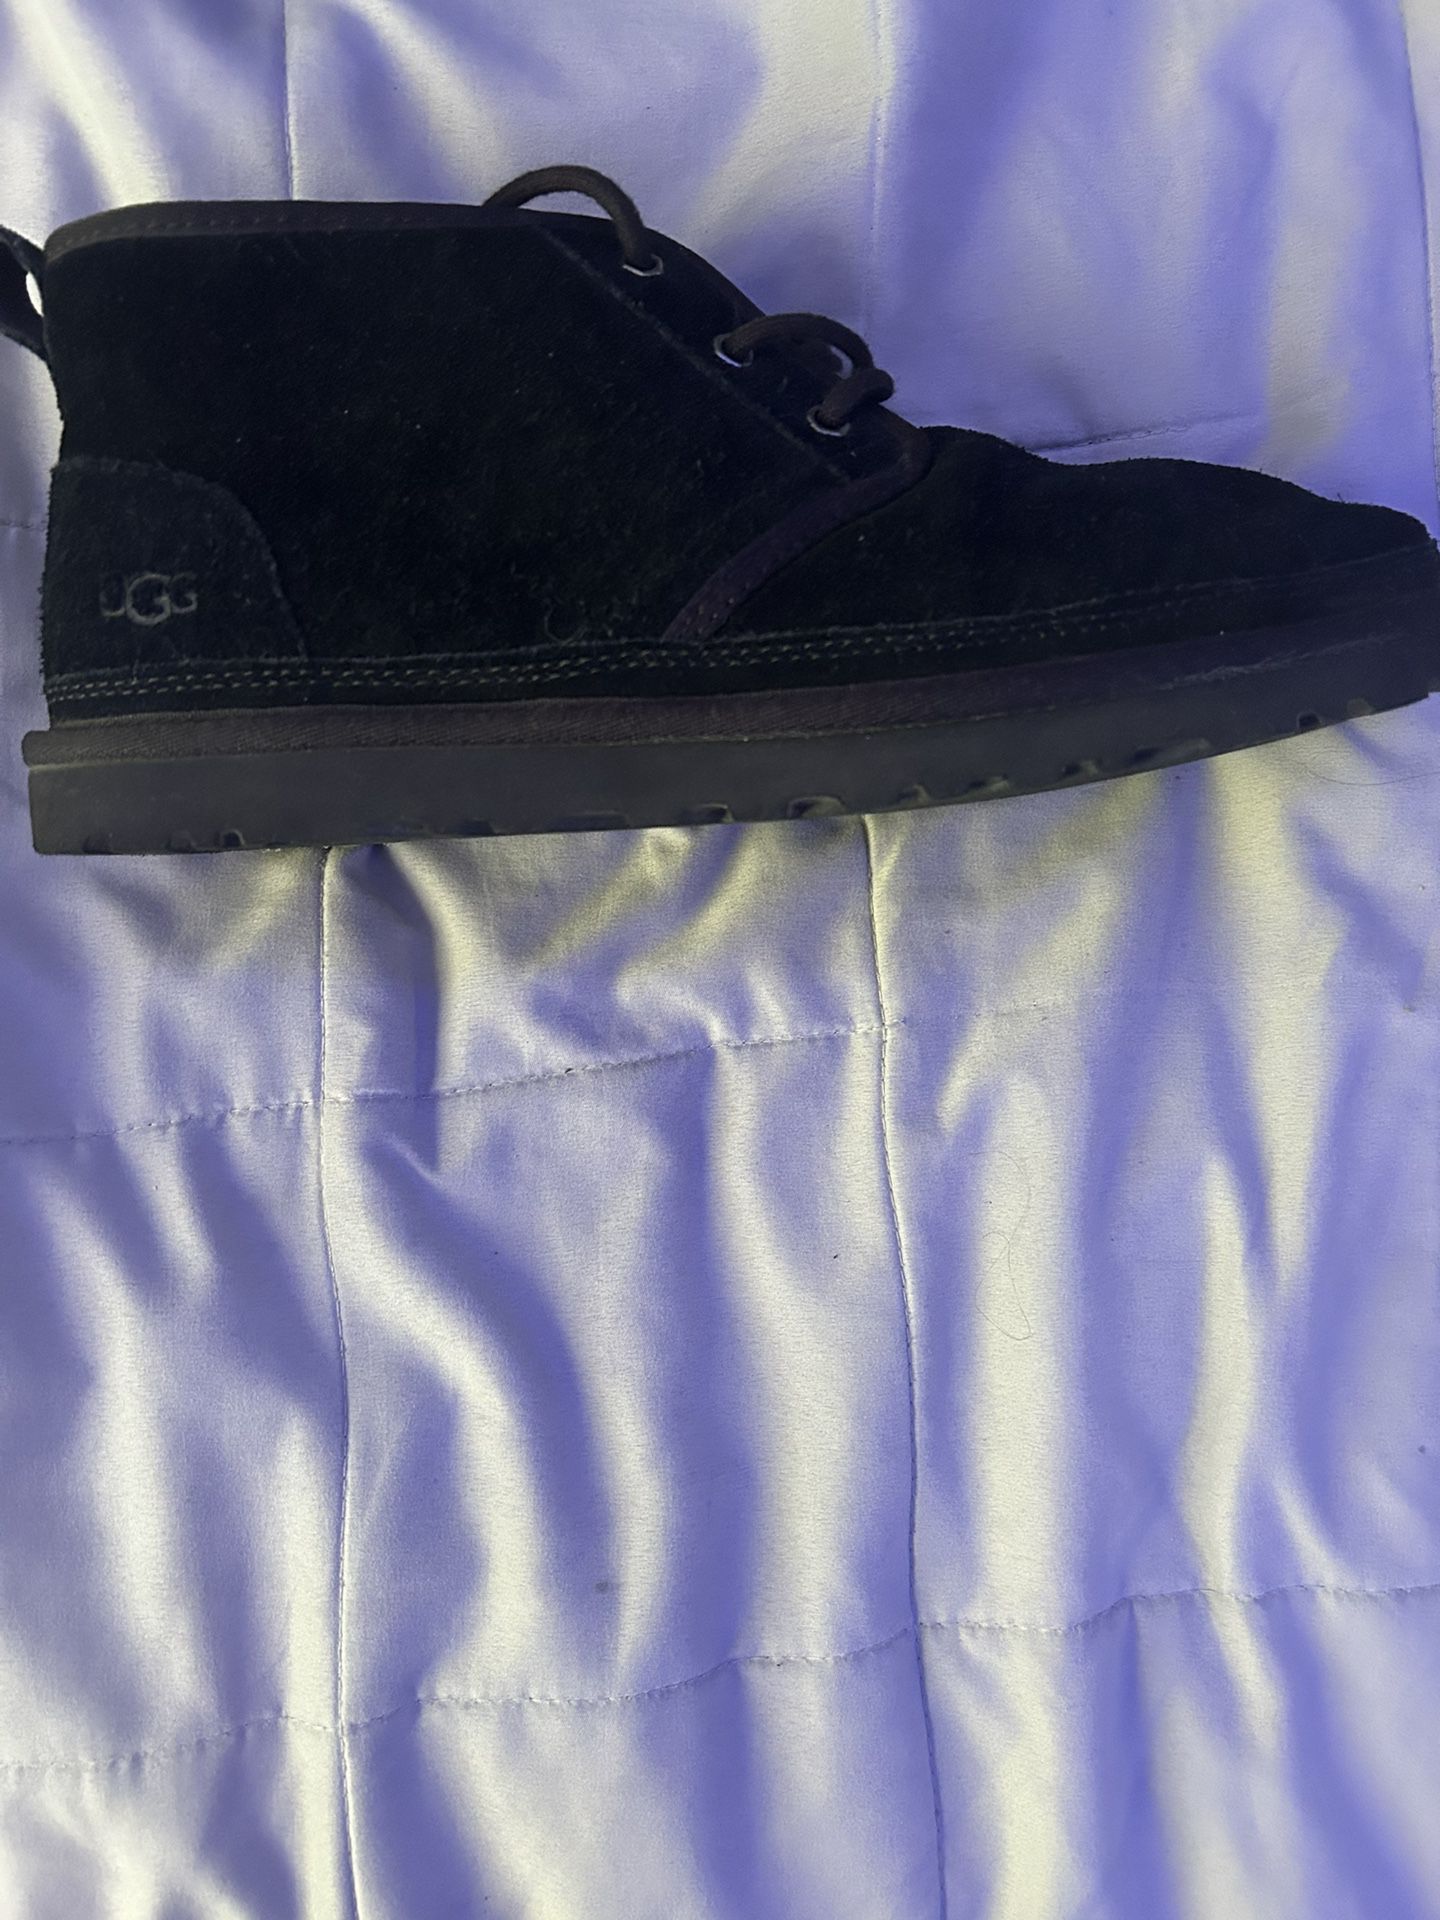 Ugg men Size 10 for 90$ Used Twice